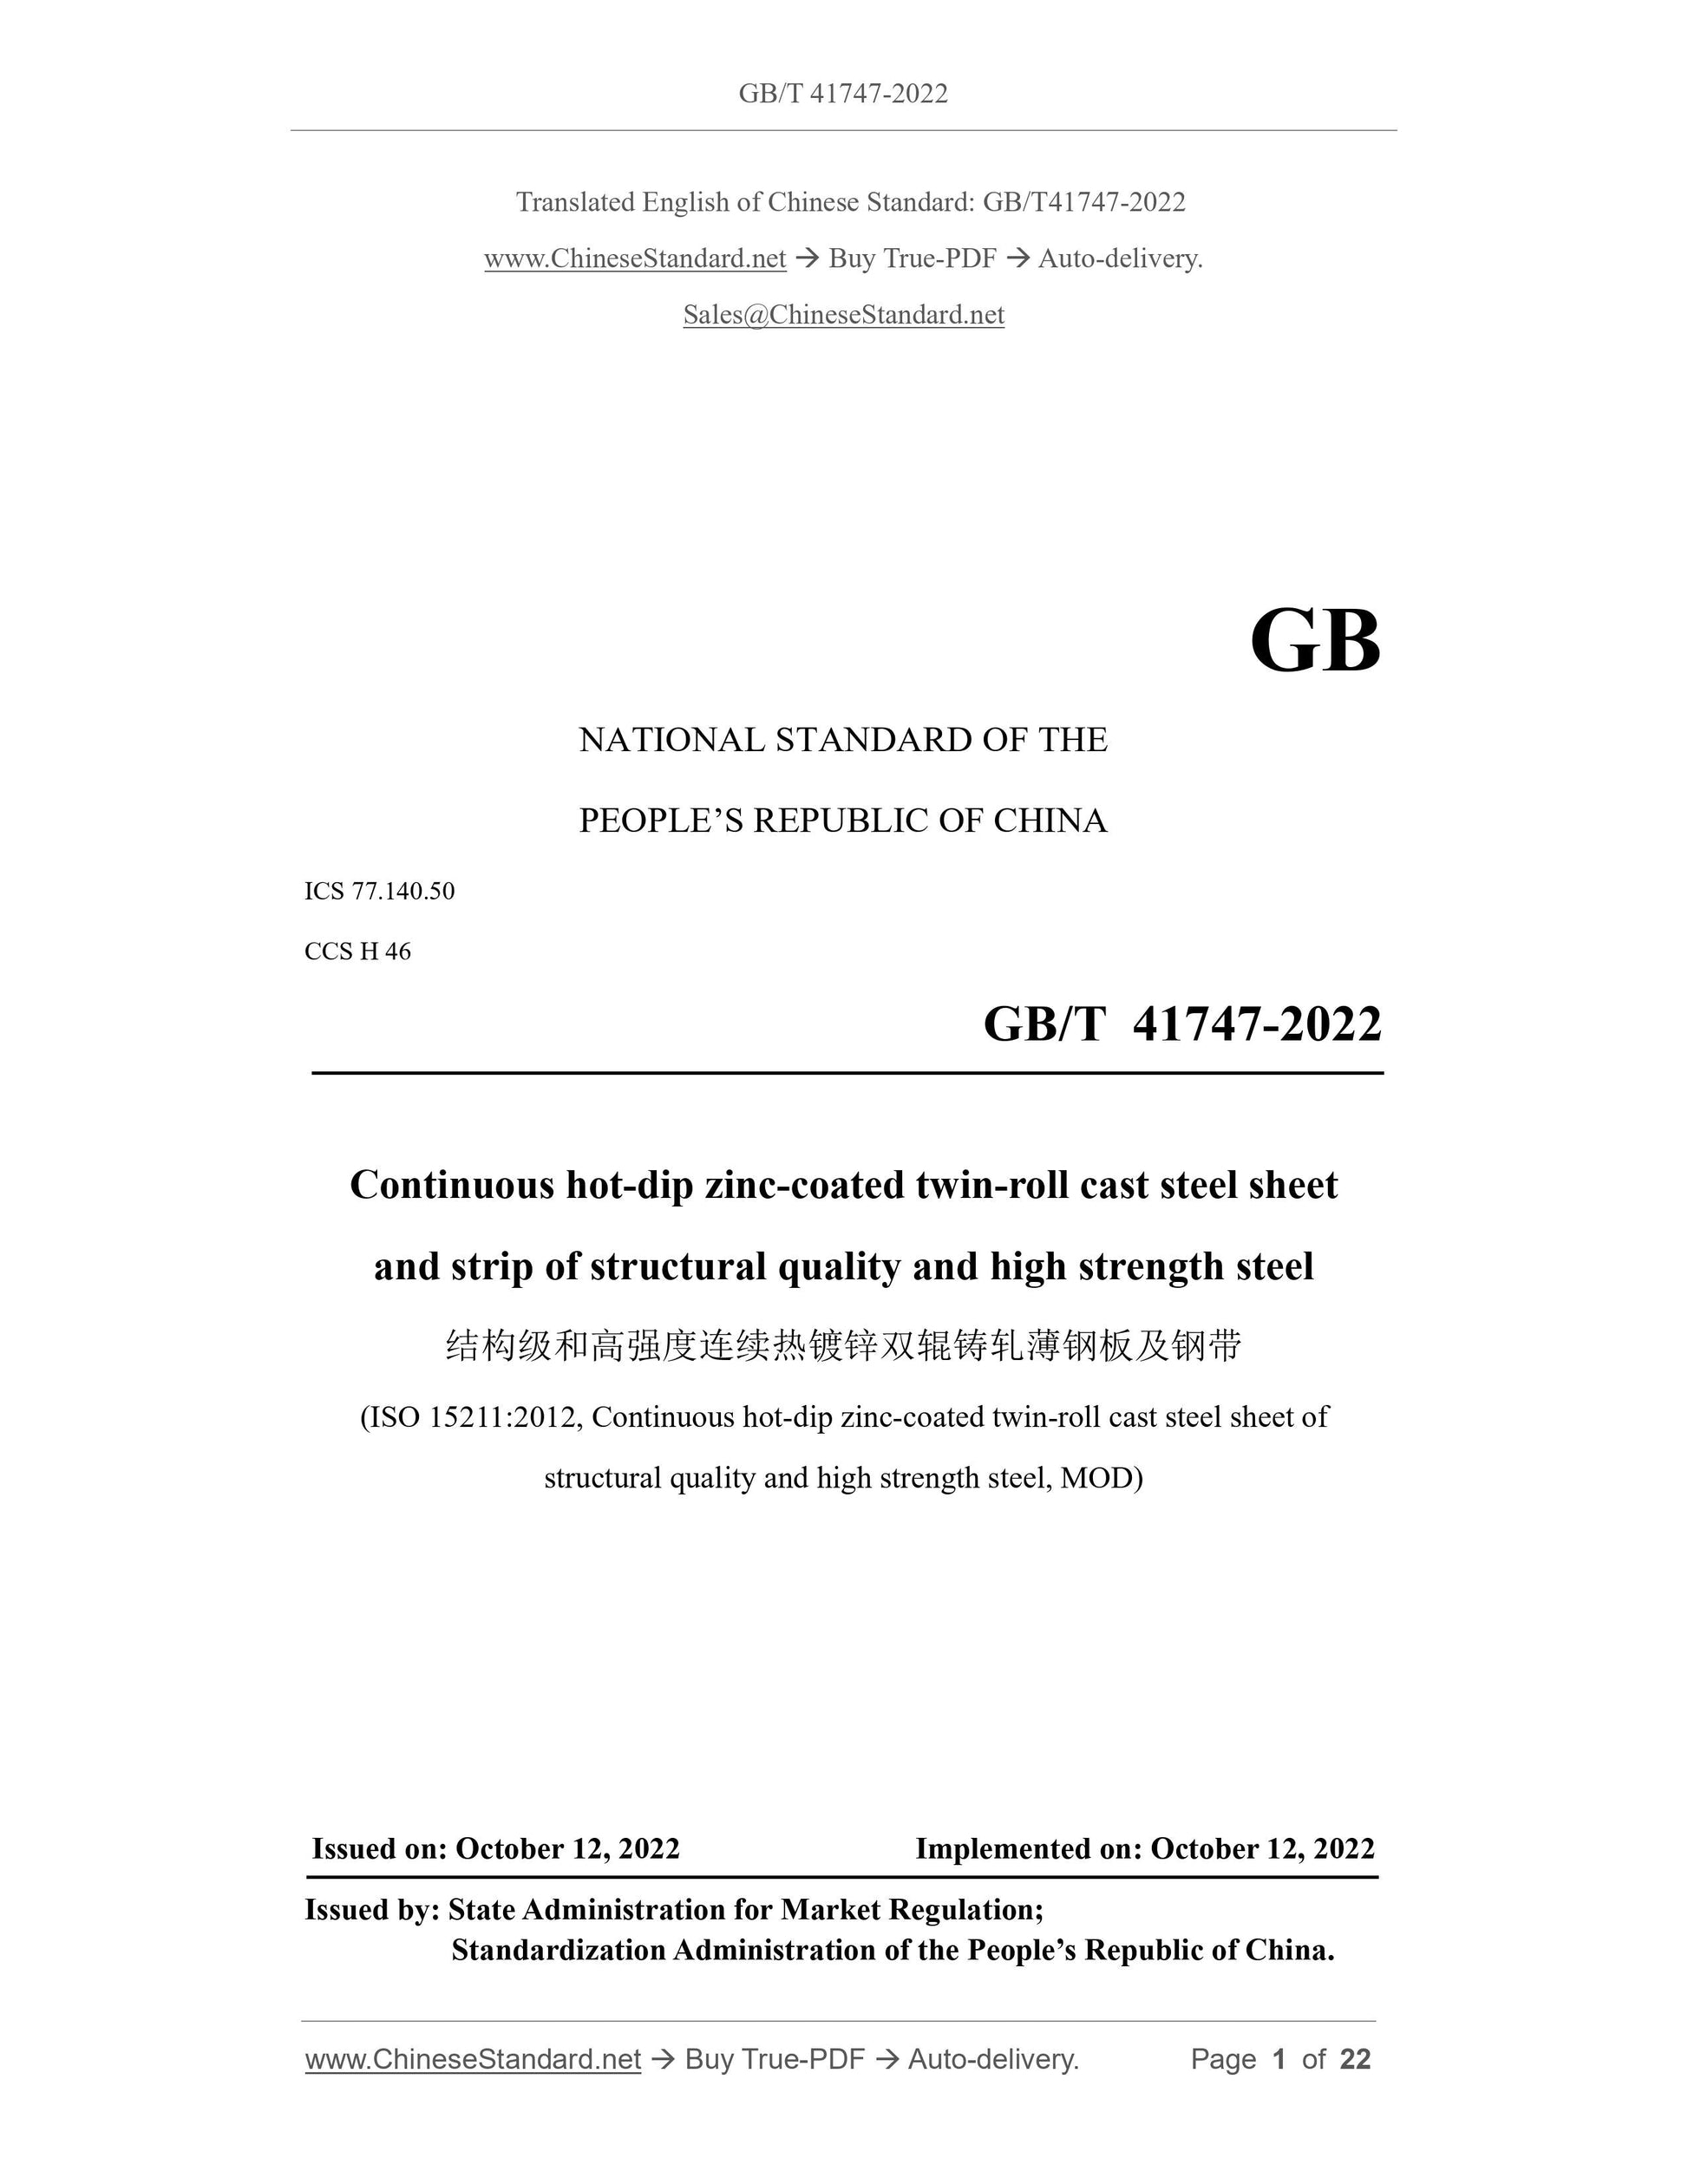 GB/T 41747-2022 Page 1